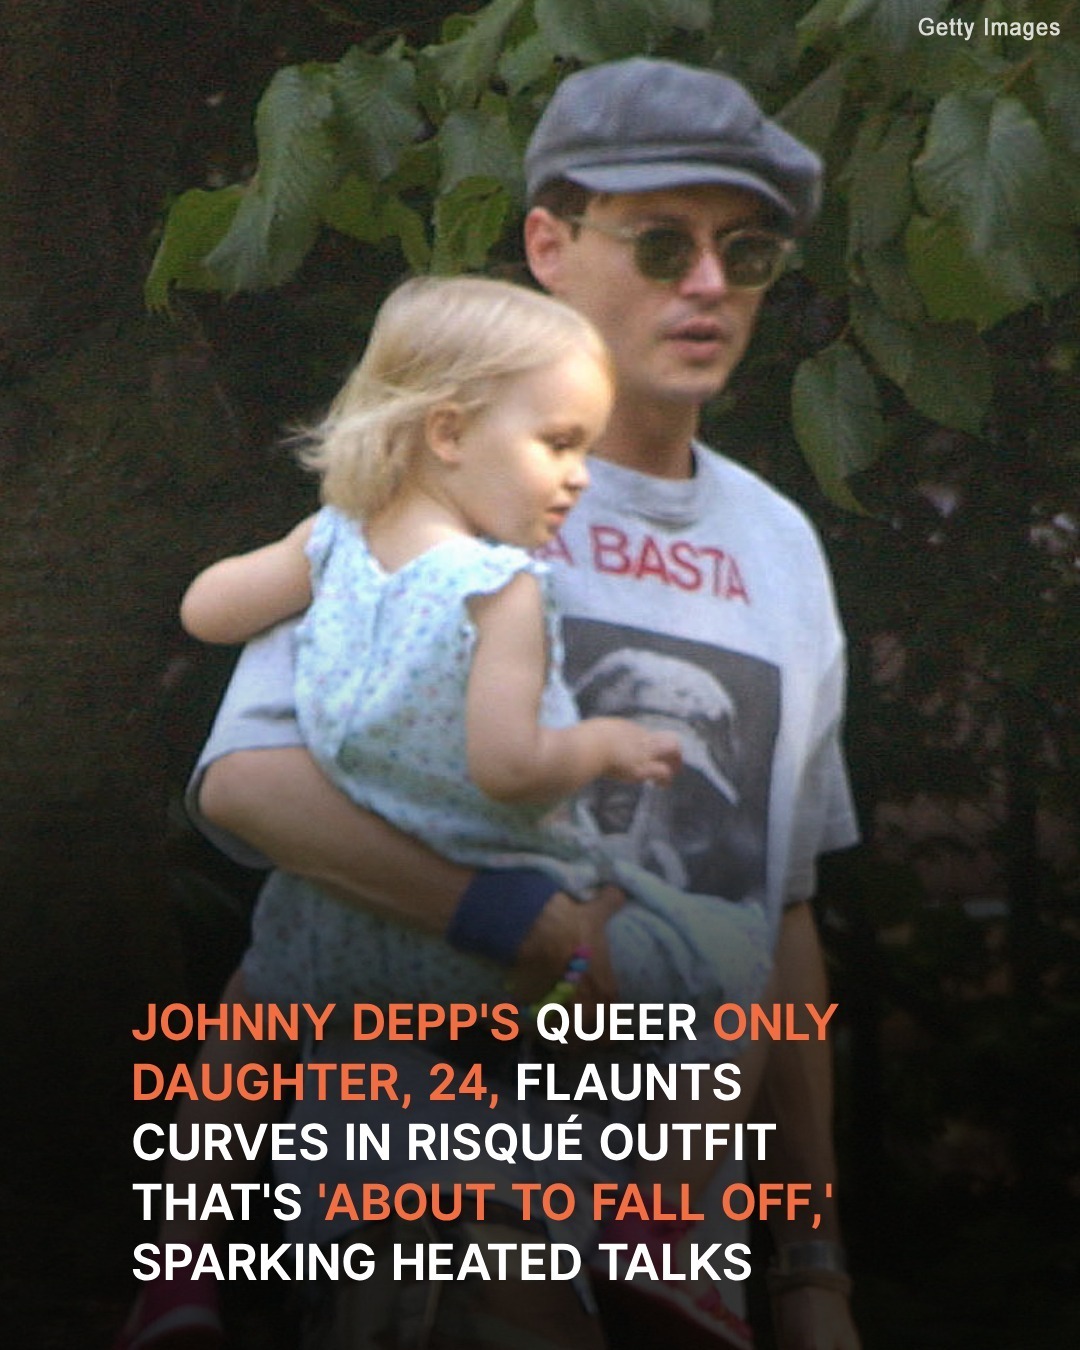 Johnny Depp’s Only Daughter, 24, Flaunts Figure in Pink Crop Top & Low-Hanging Skirt in Public Outing